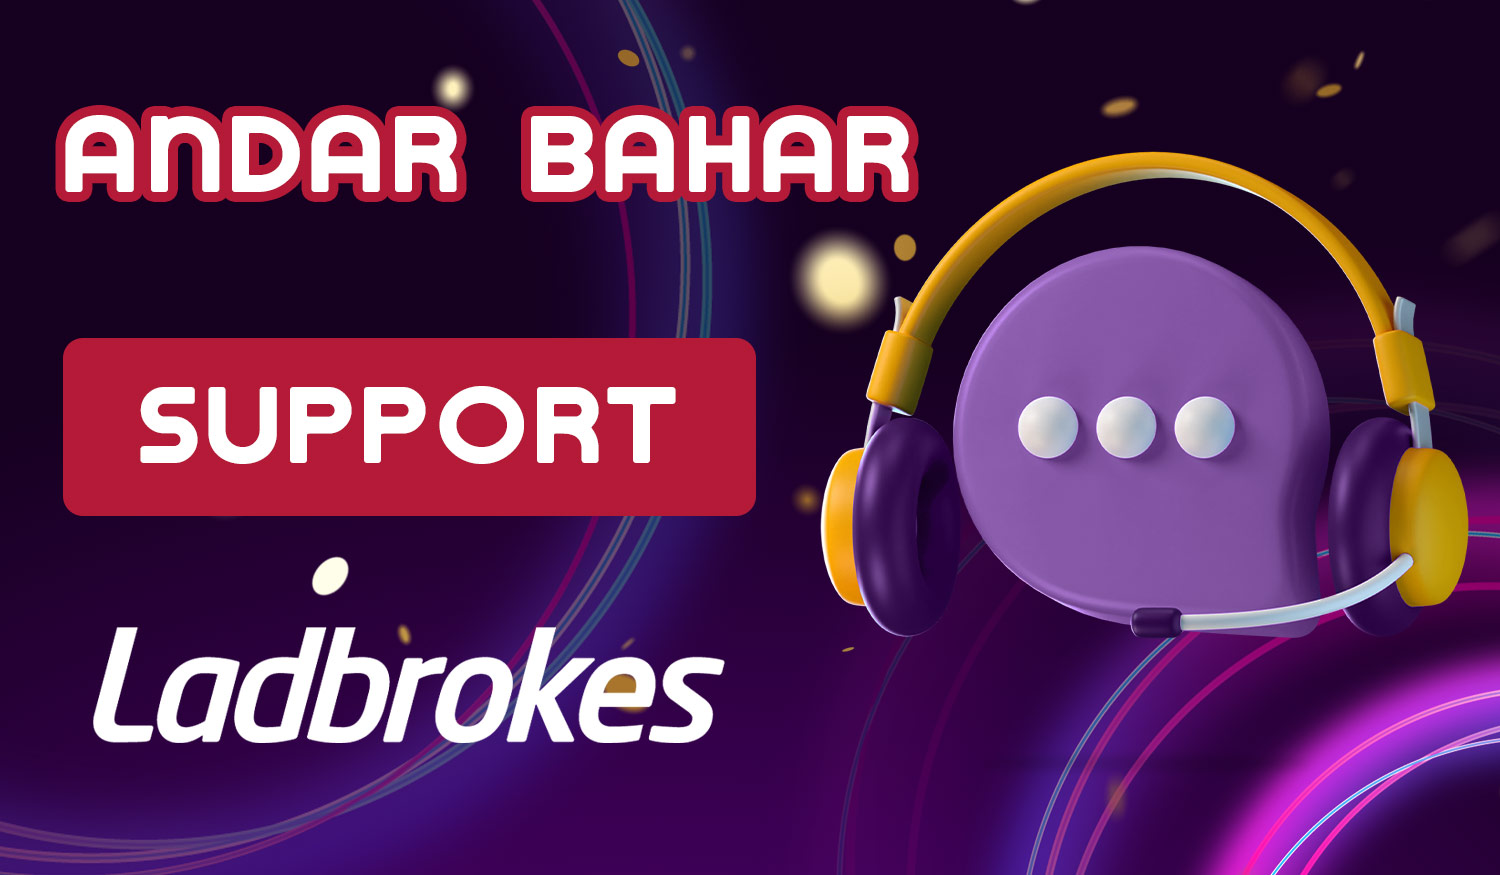 Ladbrokes India provides customer support to ensure its players have a seamless and enjoyable gaming experience 24/7